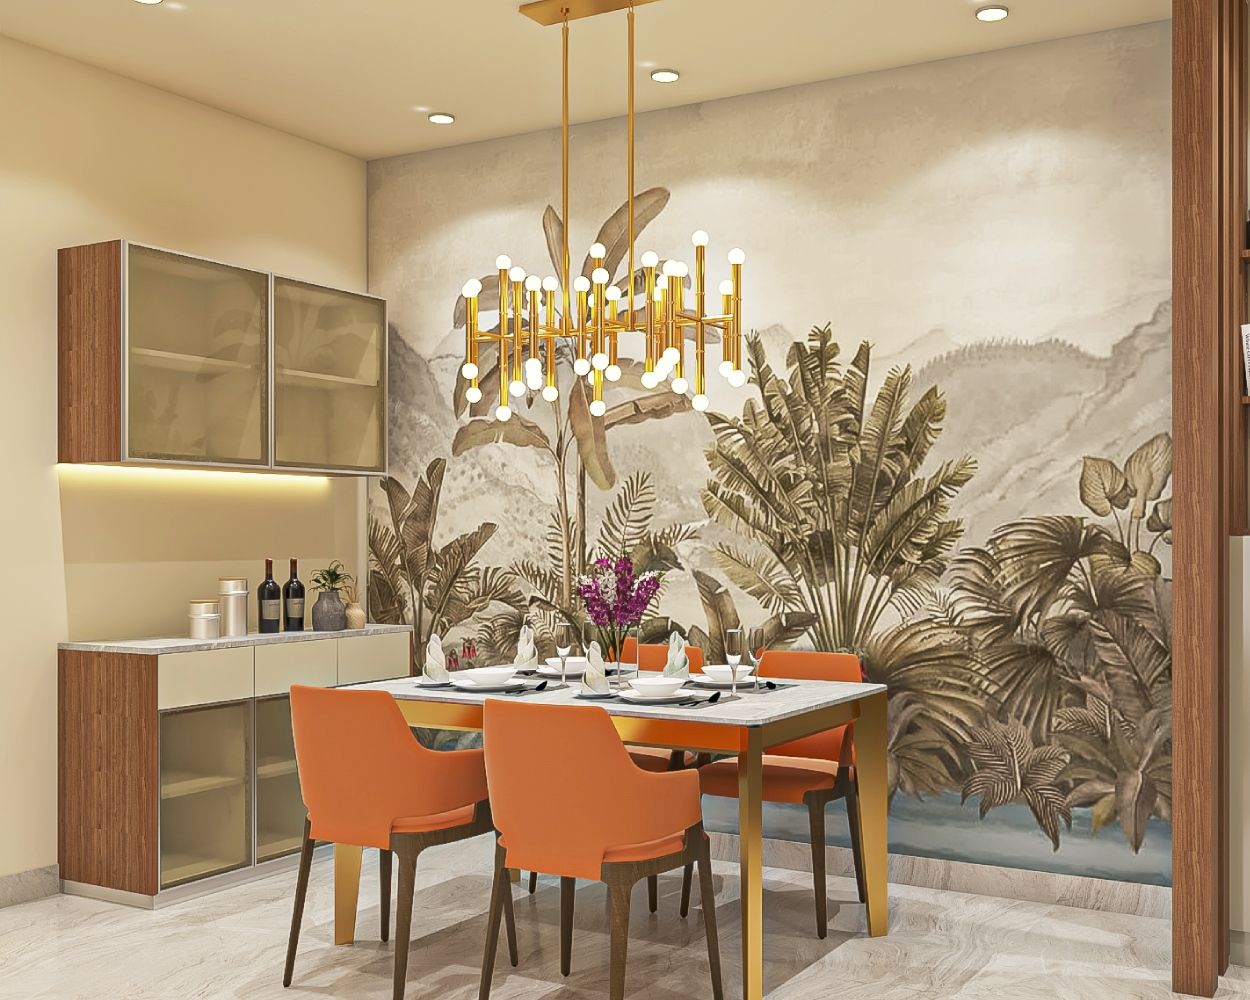 Contemporary 4-Seater Marble Dining Room Design With Orange Chairs And Tropical Wallpaper